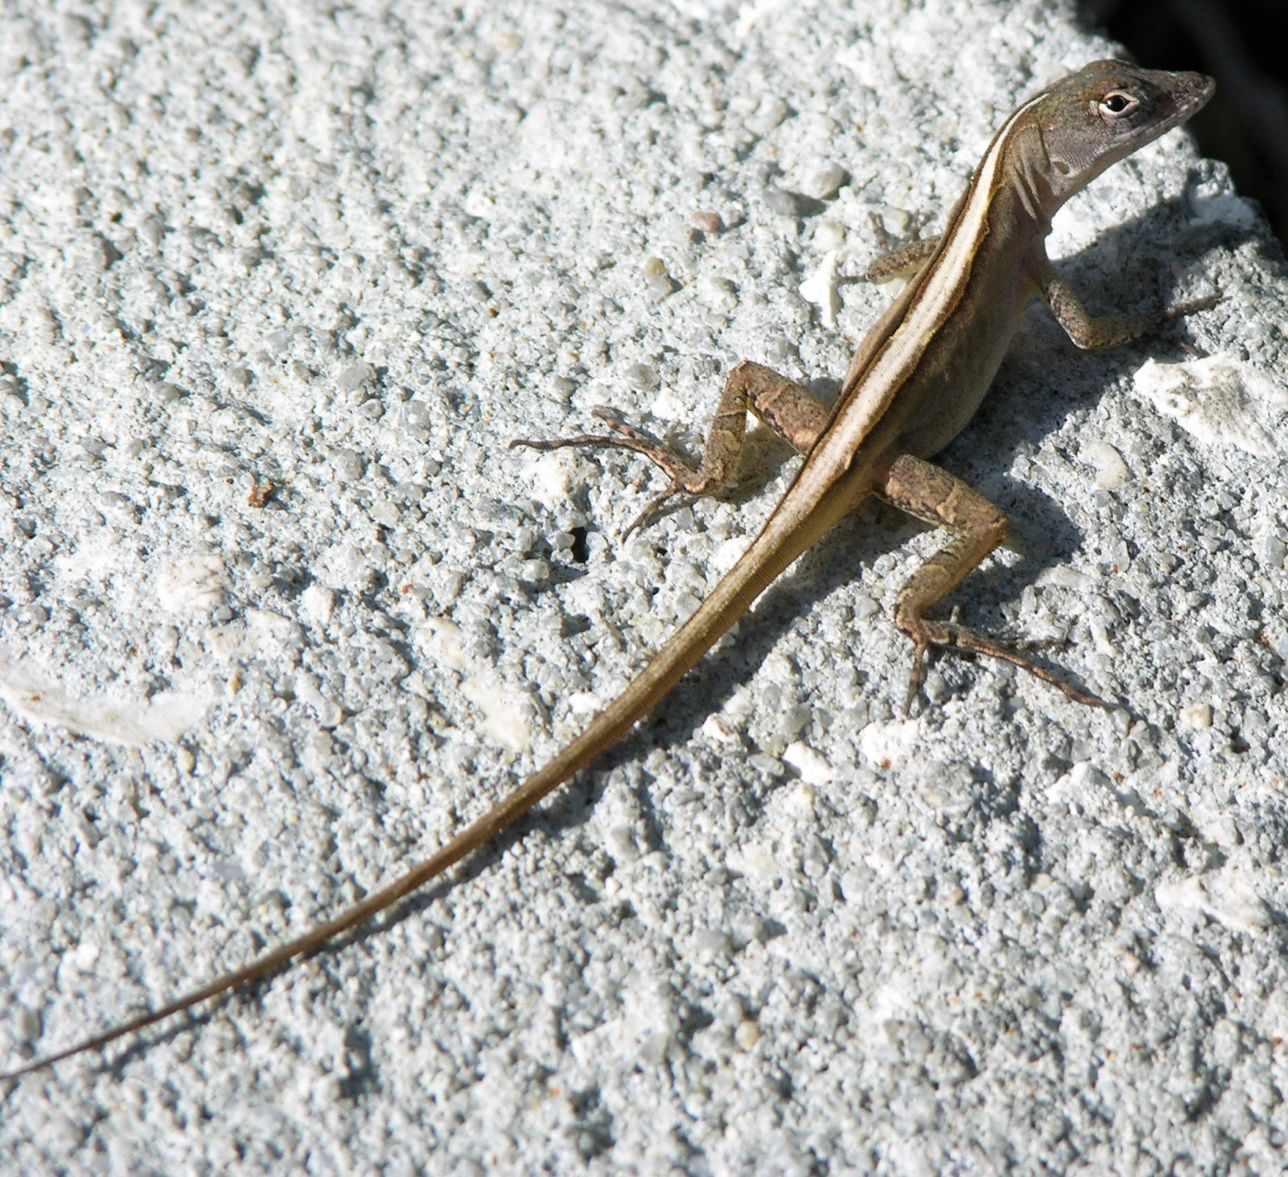 Female brown anoles (Anolis sagrei) have a light-colored line down the center of their back, though it’s not always as well demarcated as this individual. 